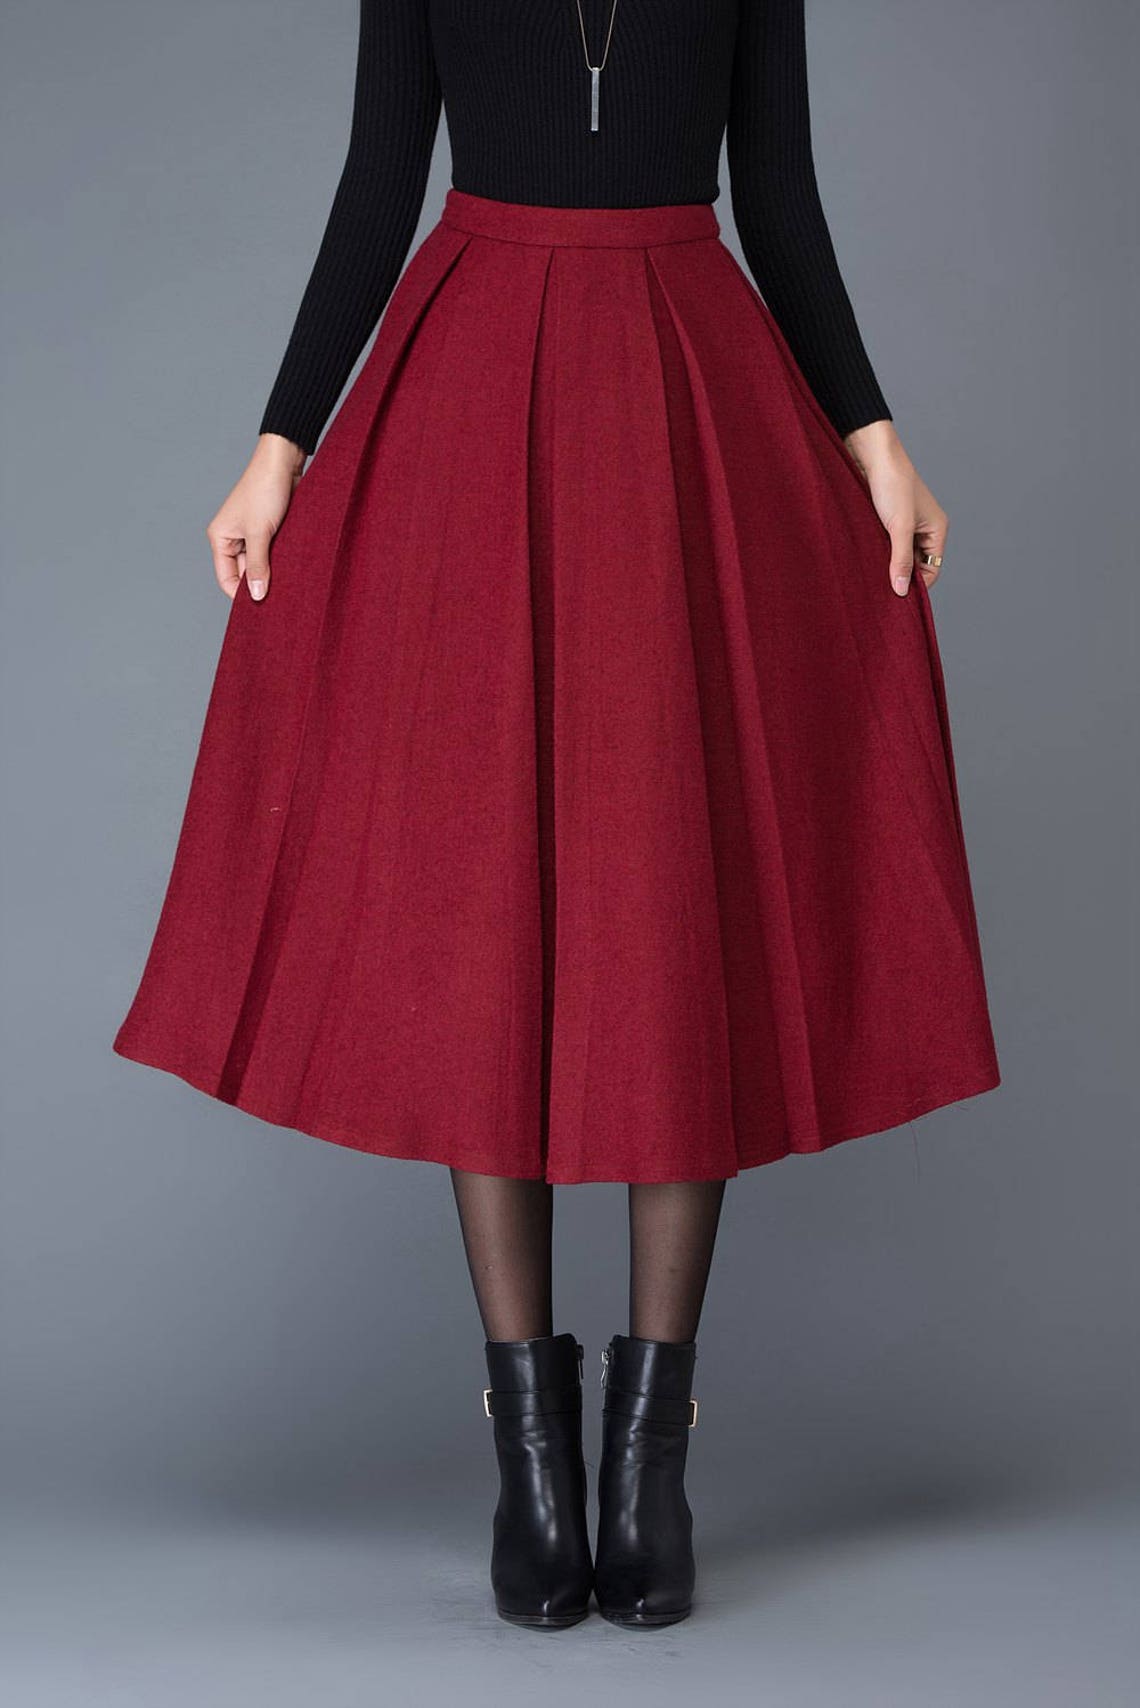 High waist wool skirt in red midi wool skirt A Line Pleated | Etsy